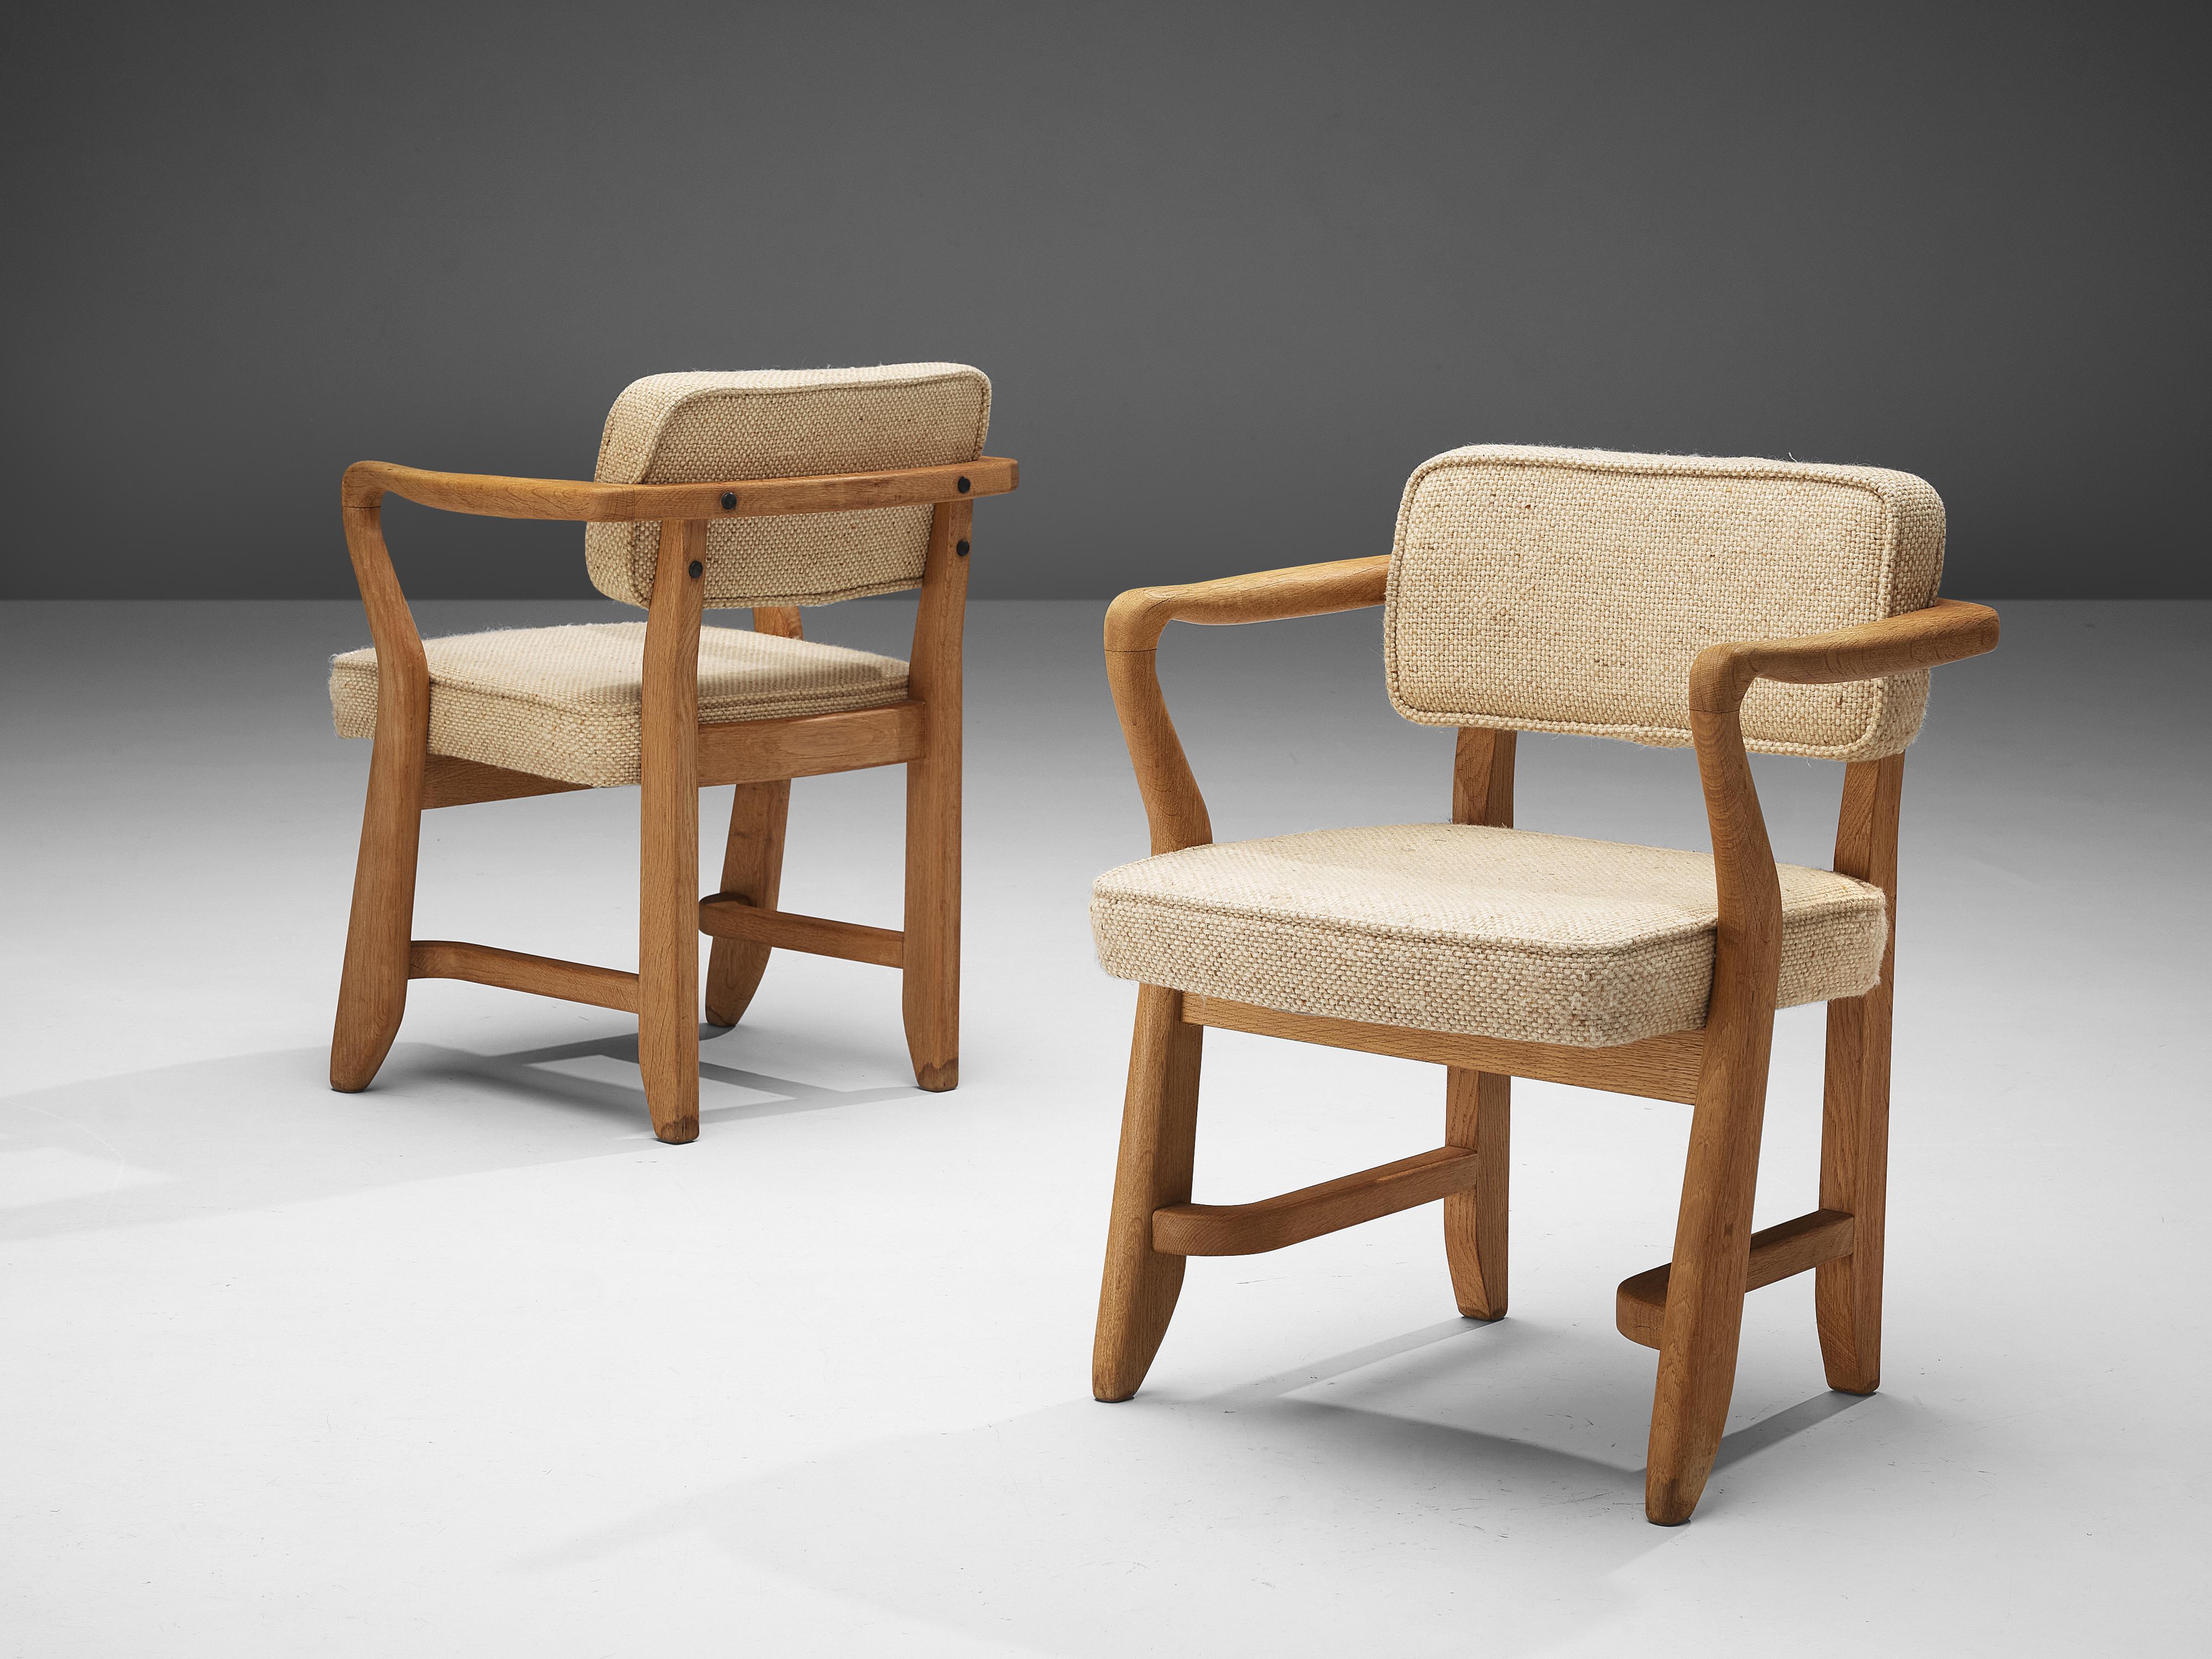 Guillerme & Chambron for Votre Maison, 'Bridge' armchairs, multicolored fabric, oak, France, 1950s

These sculptural easy chairs are designed by Guillerme and Chambron. The duo is known for their high quality solid oak furniture. These chairs are